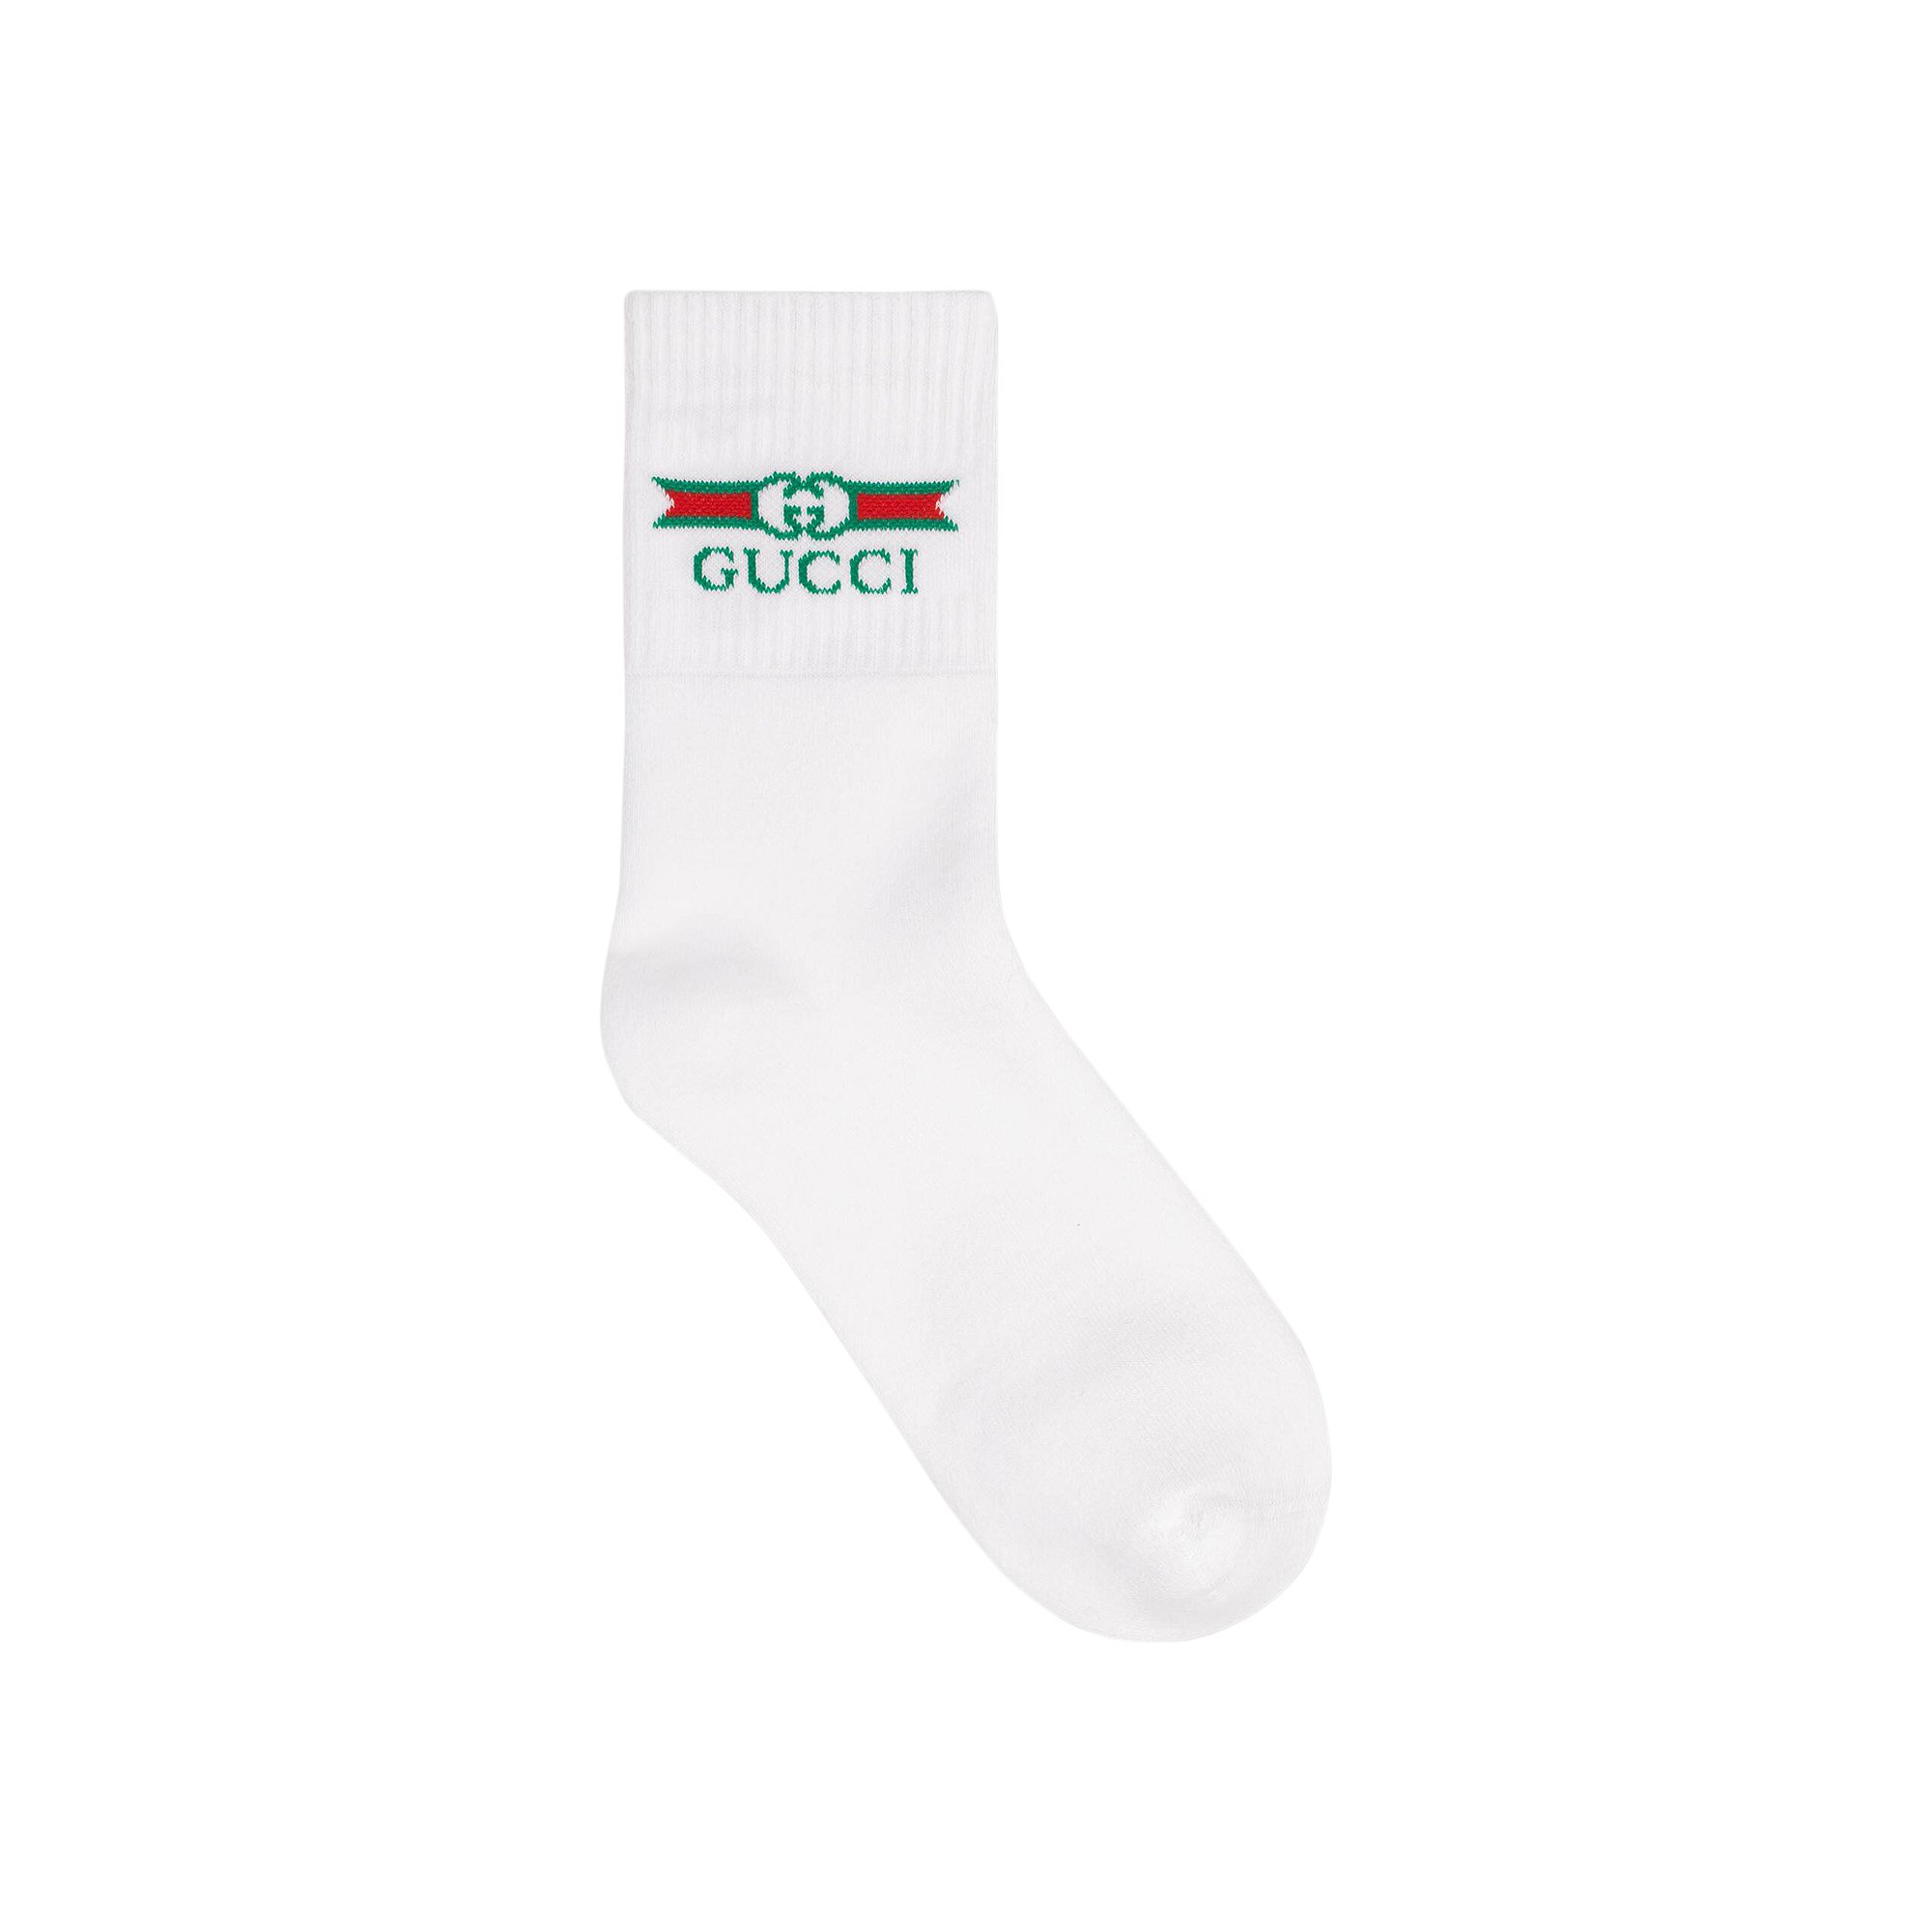 Buy Gucci Socks With Gucci Label Detail 'Ivory' - 604038 4GA25 